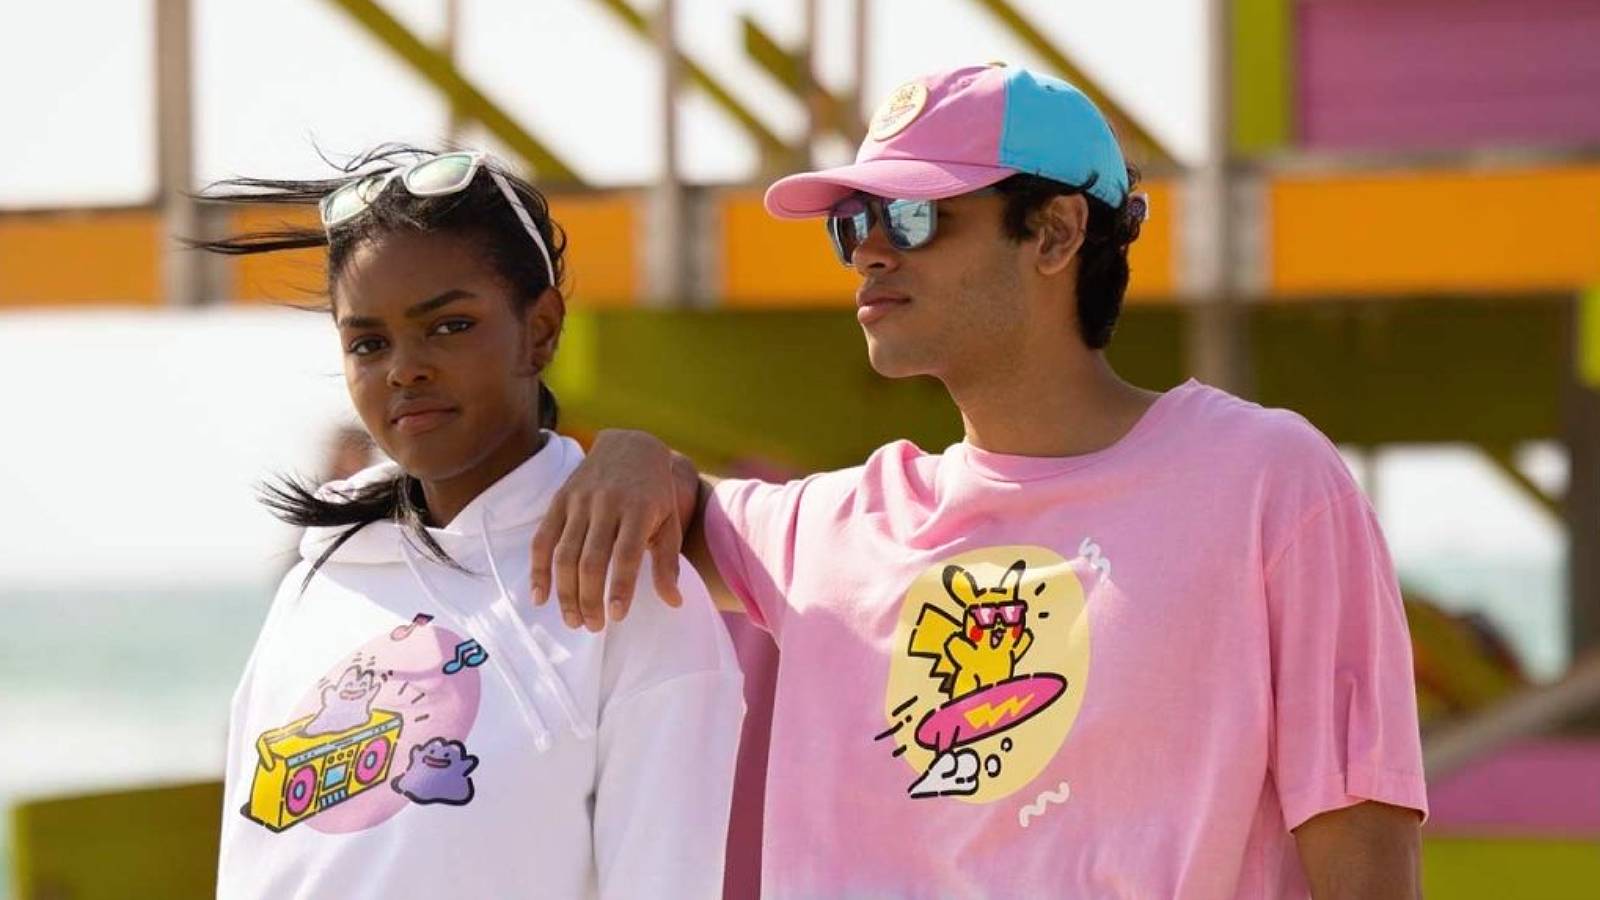 Two models are shown on a beach wearing pastel-colored Pokemon clothing